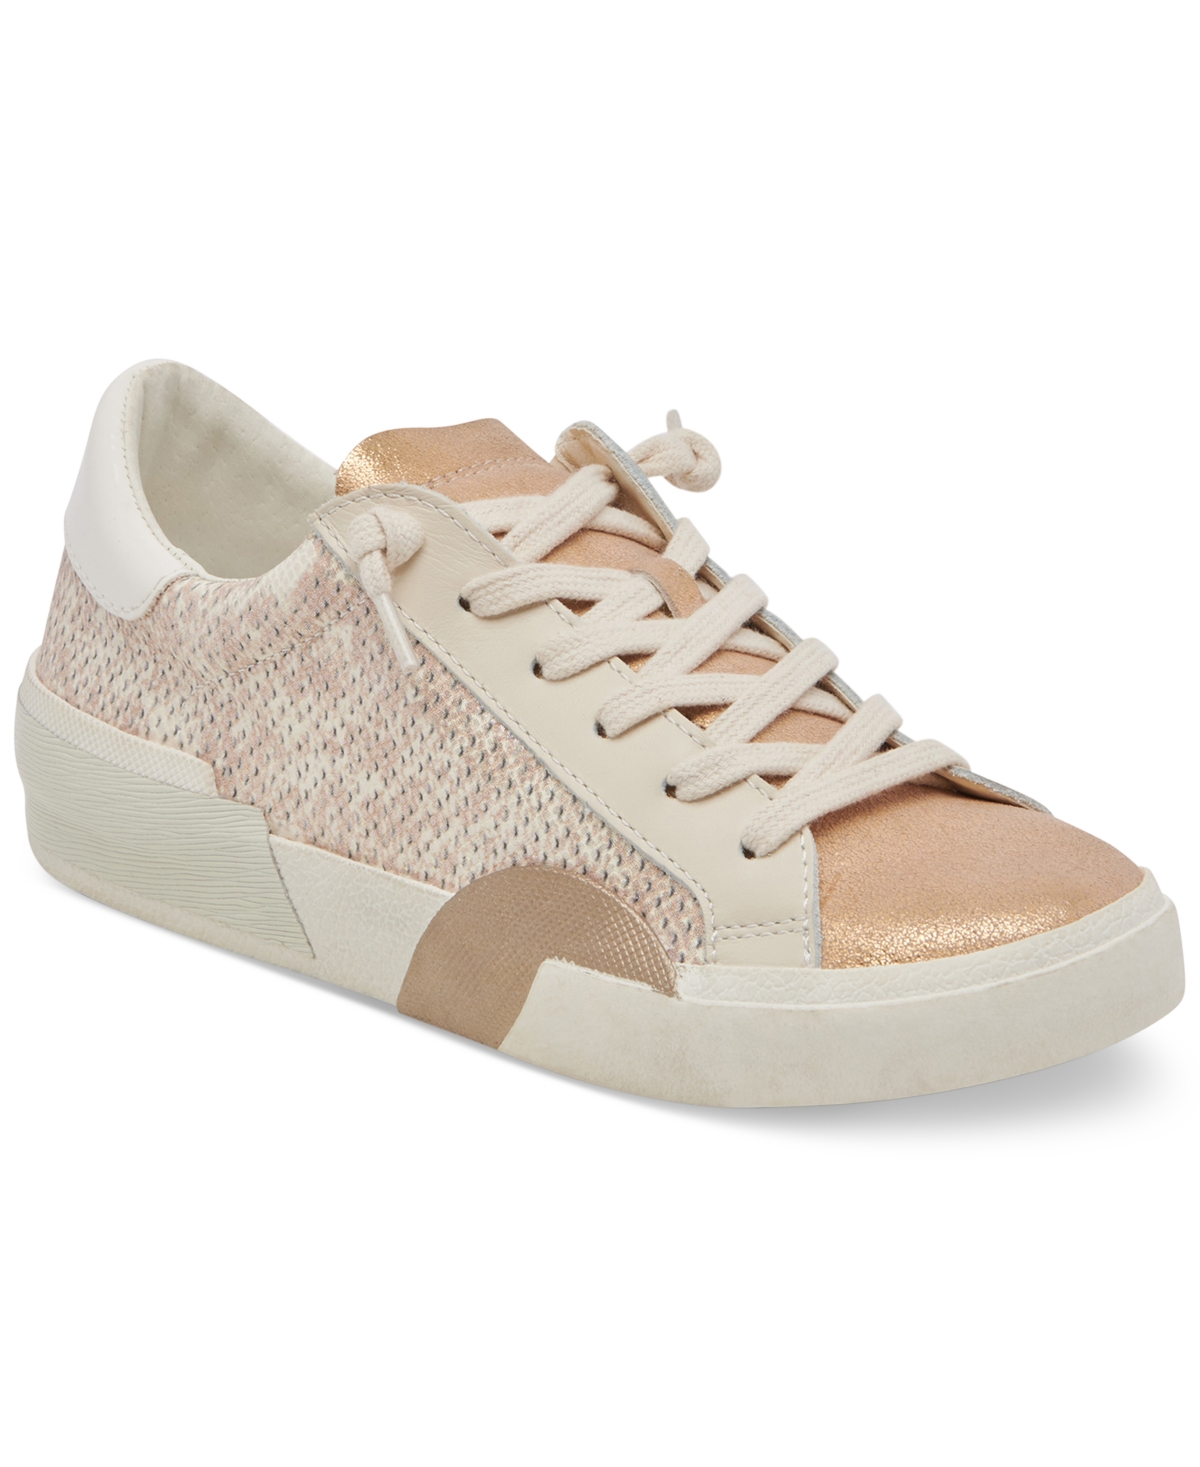 DOLCE VITA WOMEN'S ZINA LACE-UP SNEAKERS